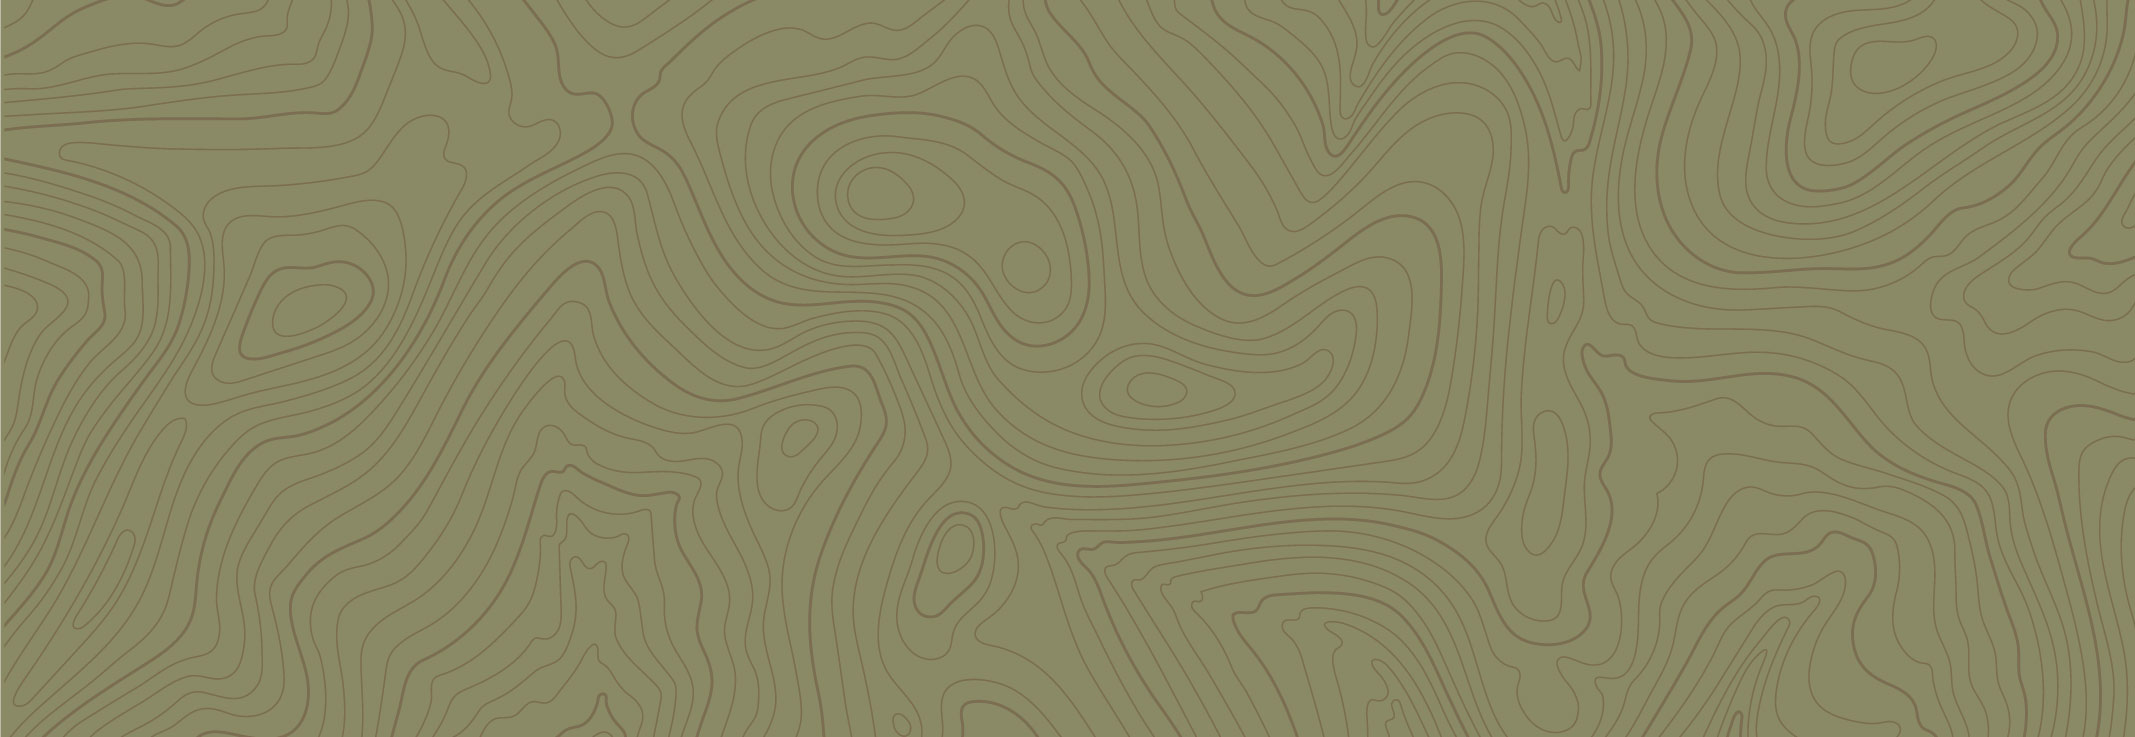 green and black pattern resembling topo lines on a map